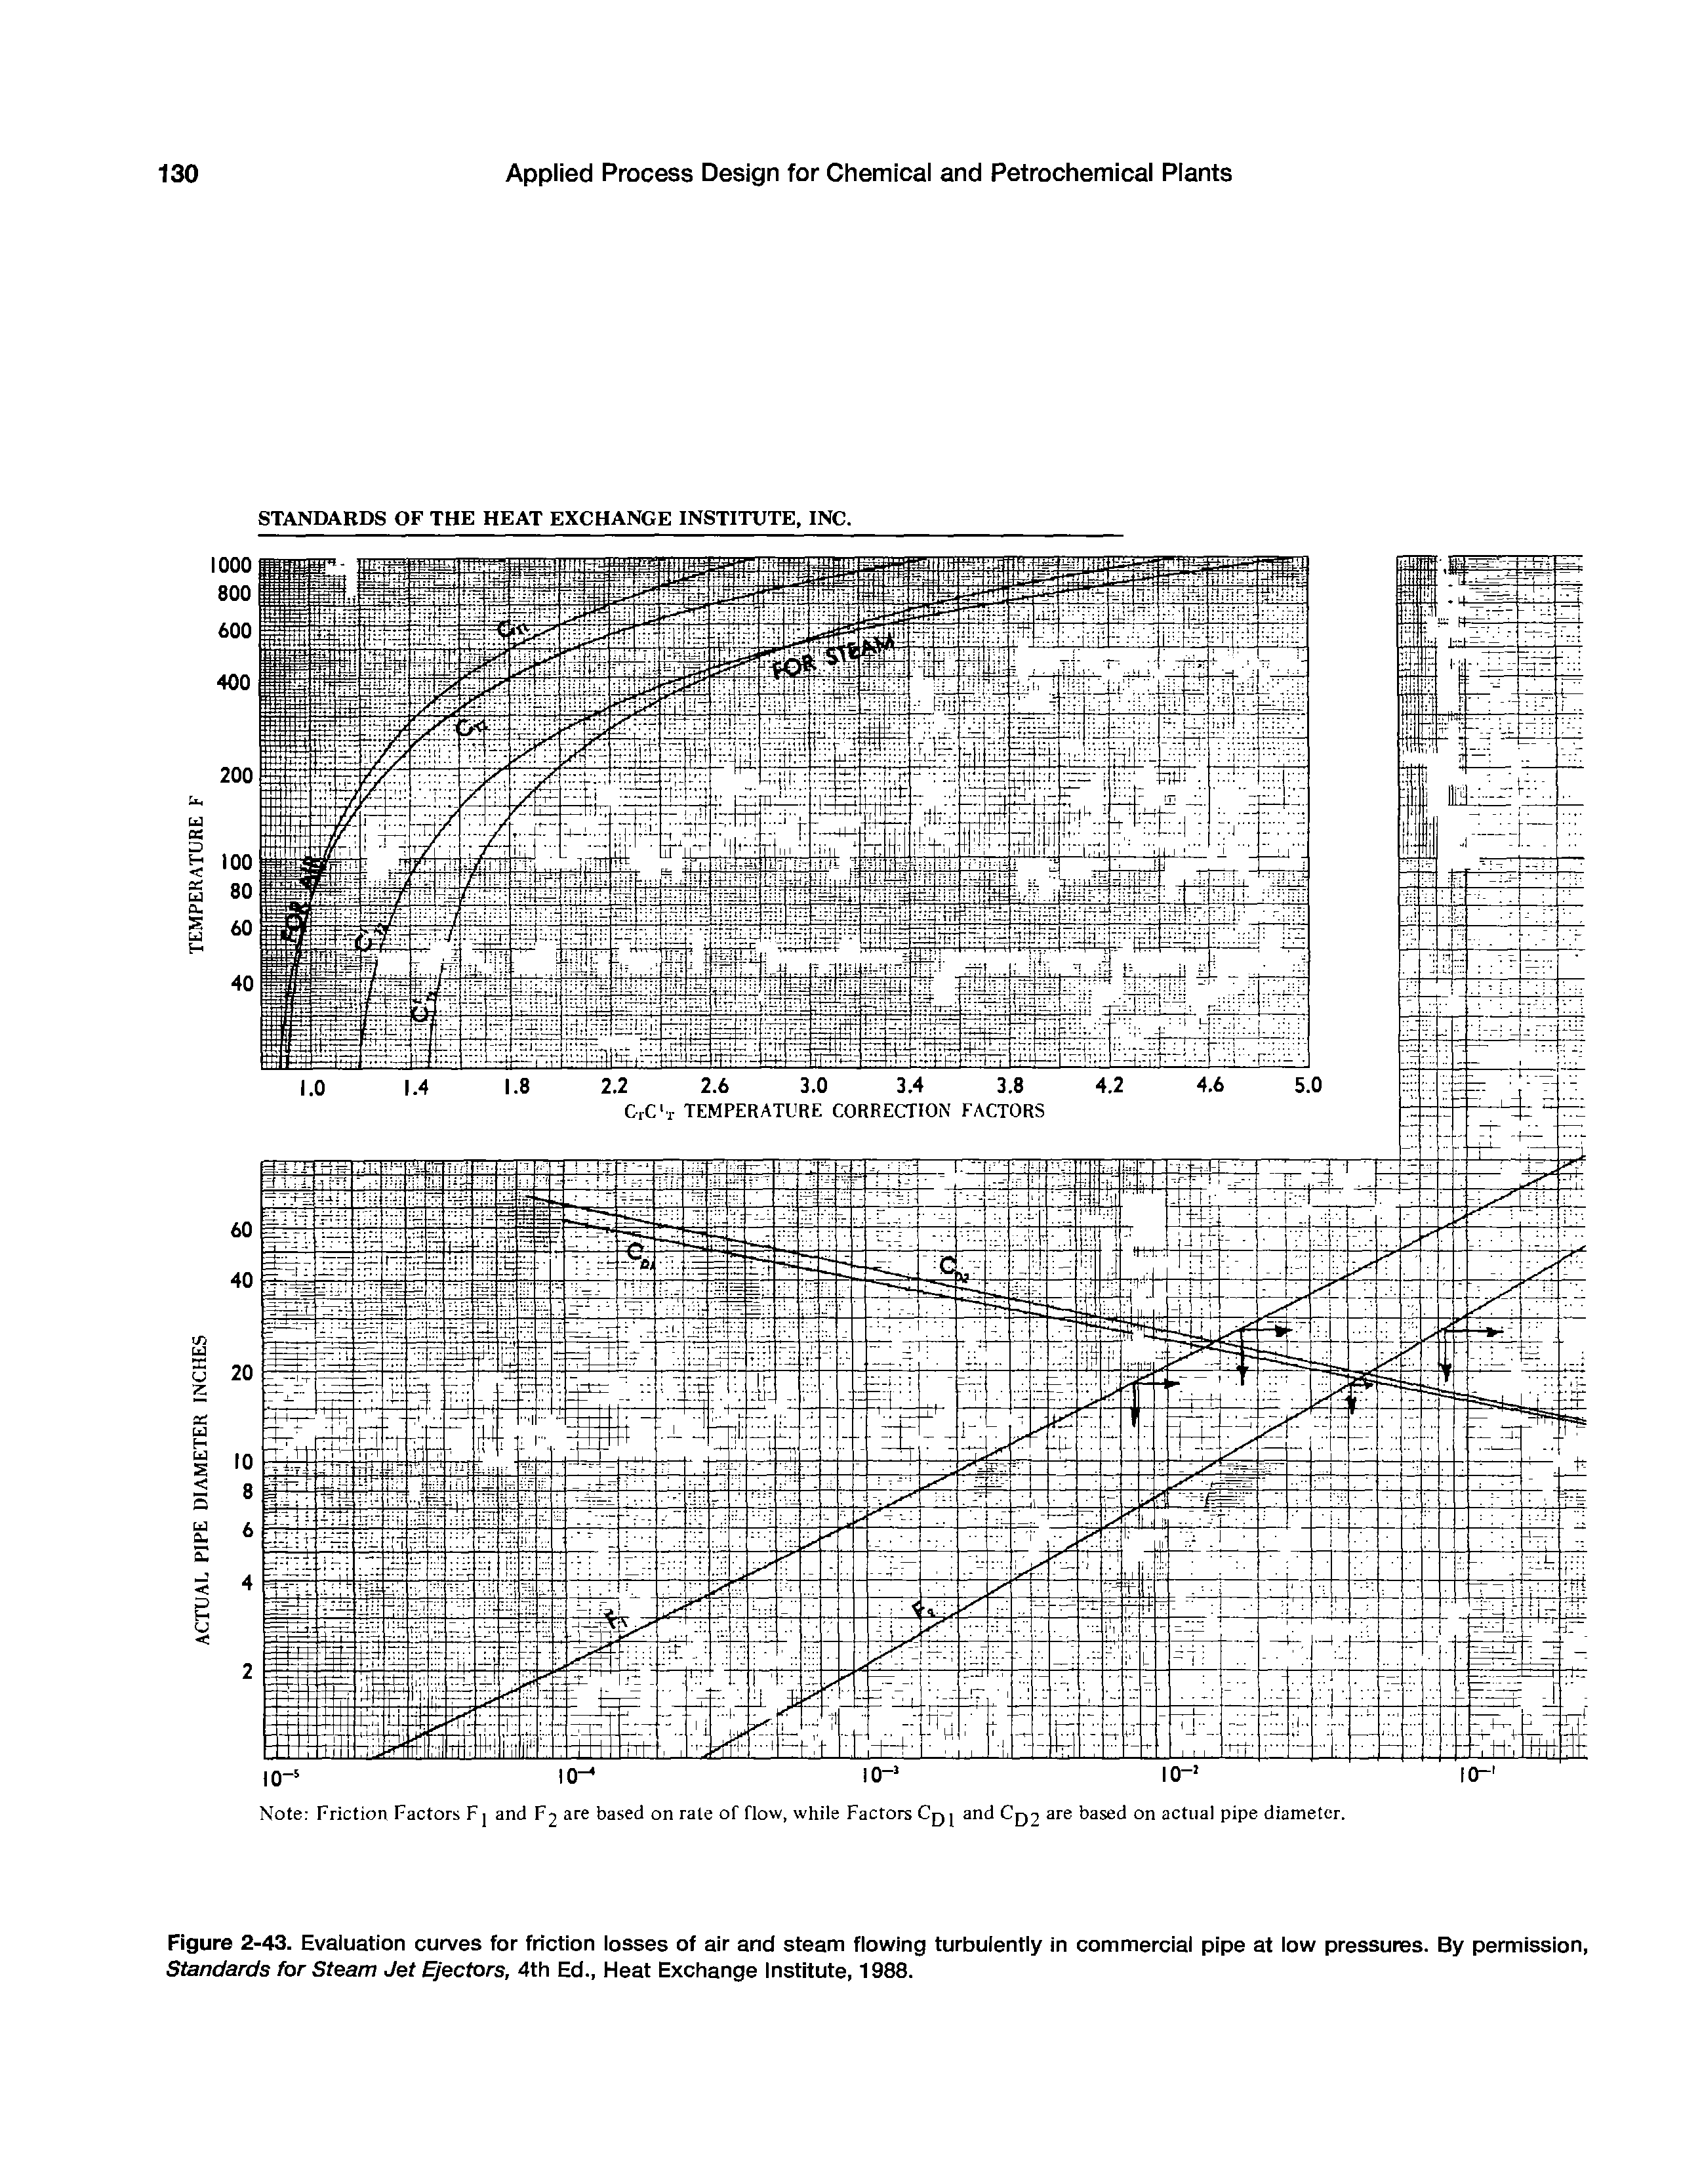 Figure 2-43. Evaluation curves for friction losses of air and steam flowing turbulently in commercial pipe at low pressures. By permission, Standards for Steam Jet Ejectors, 4th Ed., Heat Exchange Institute, 1988.